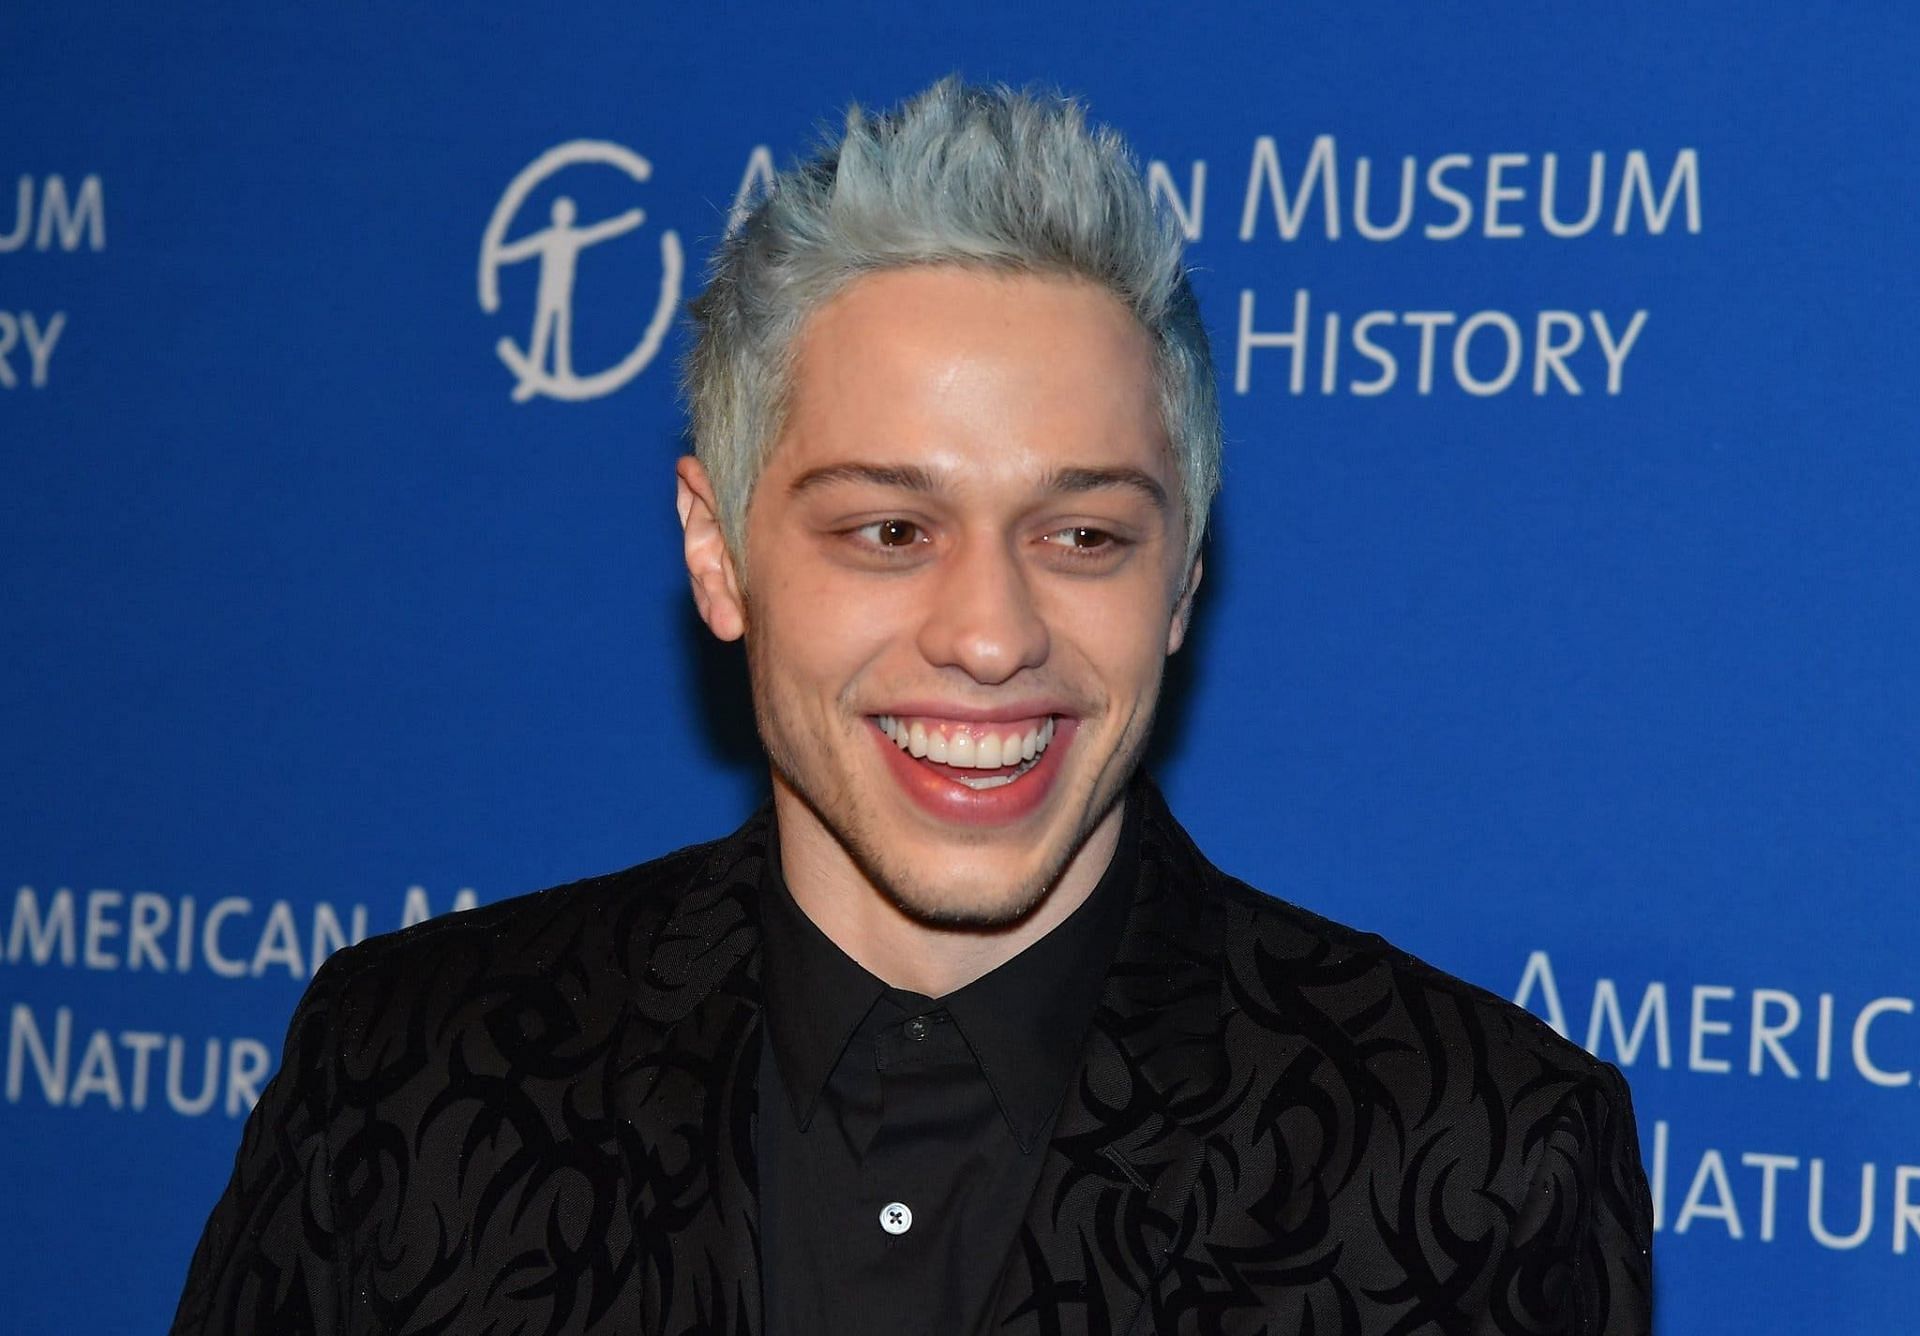 Social media users startled after rumor spread on social media about Pete Davidson dating Ice Spice. (Image via Getty Images)